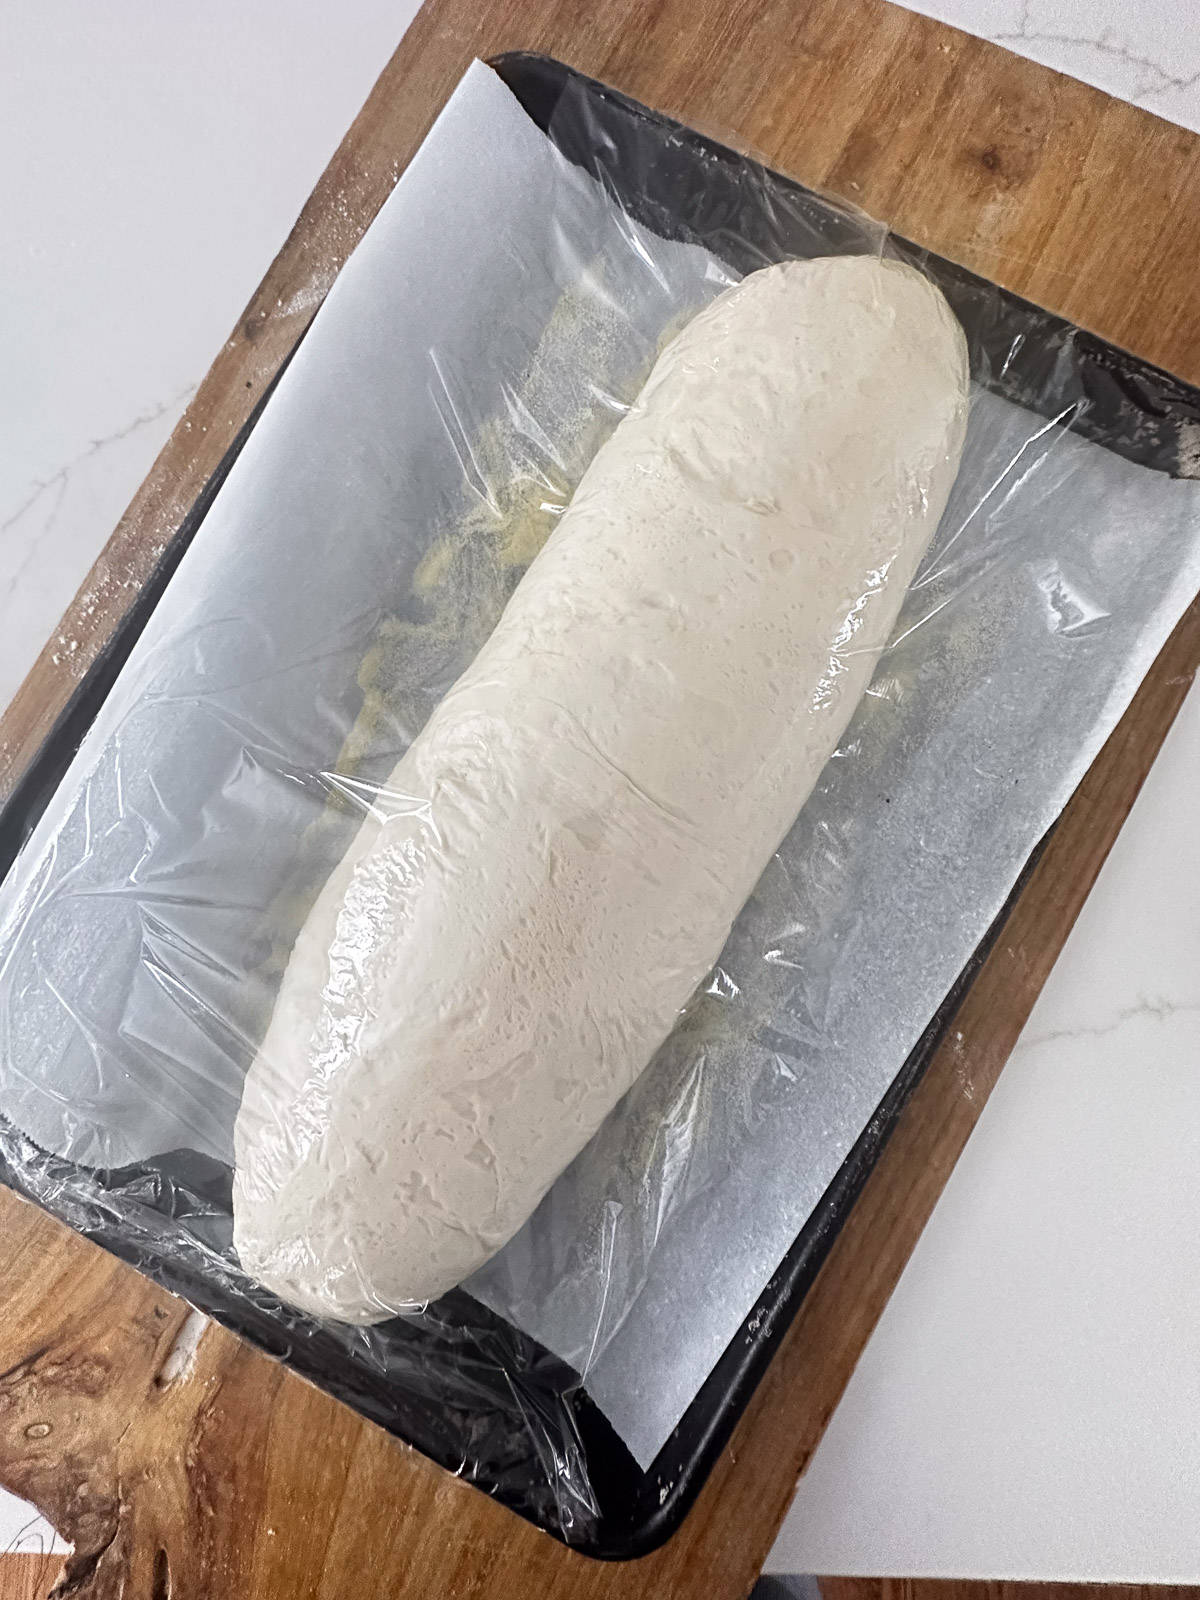 Risen loaf of Italian bread about to be baked.